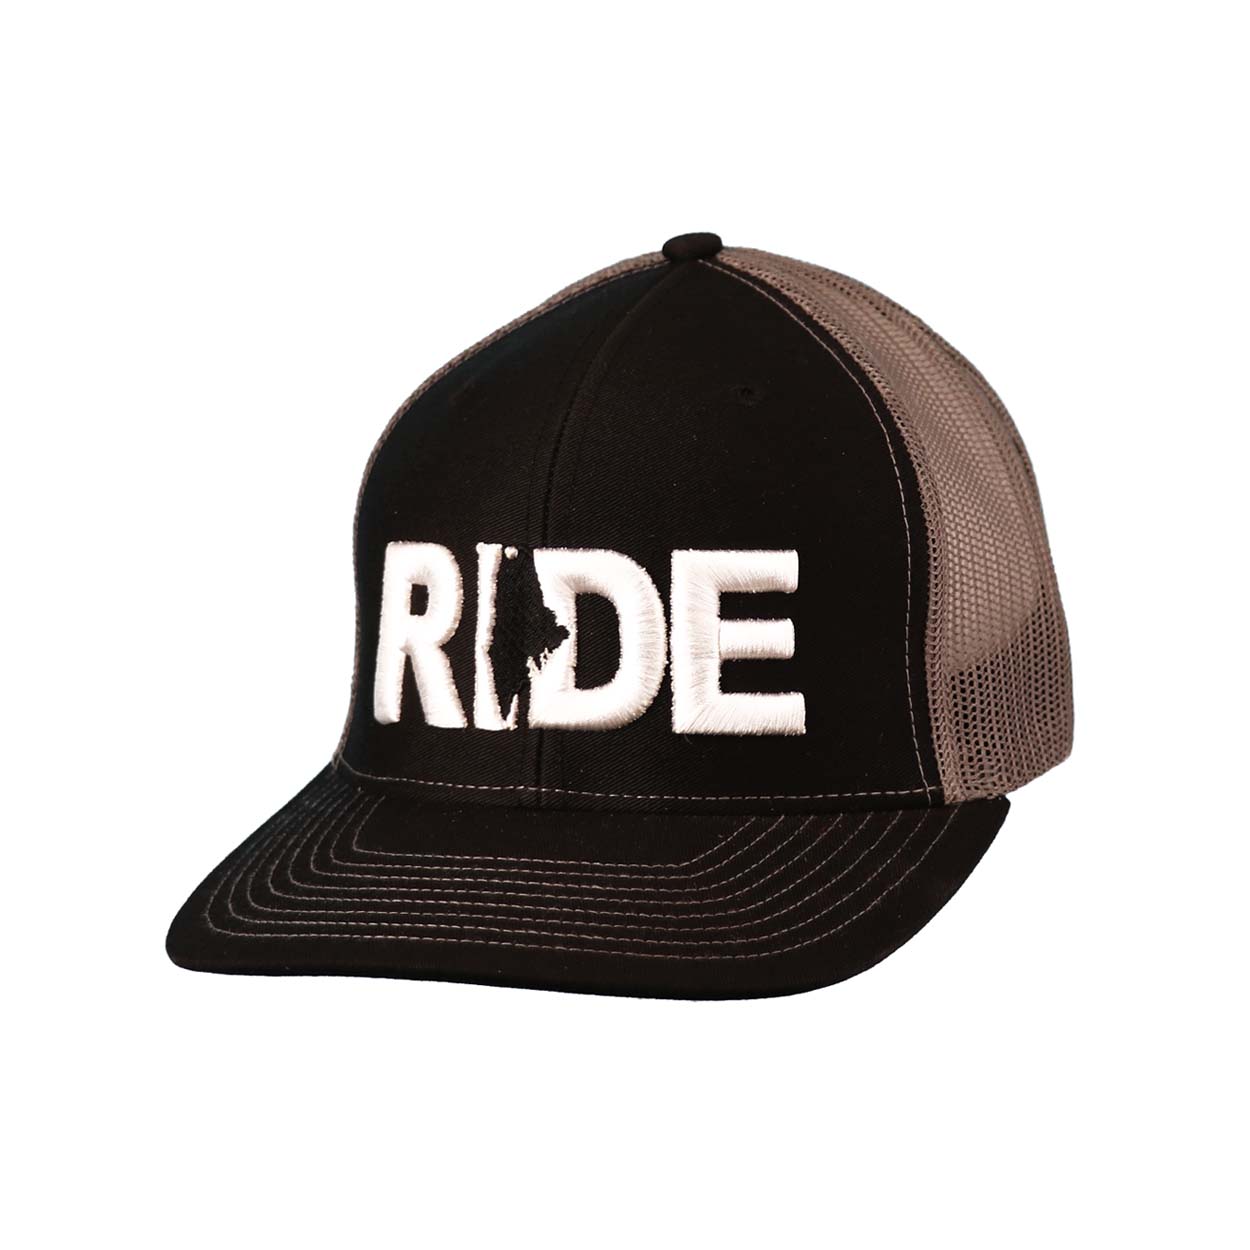 Ride Maine Classic Pro 3D Puff Embroidered Snapback Trucker Hat Black/Gray